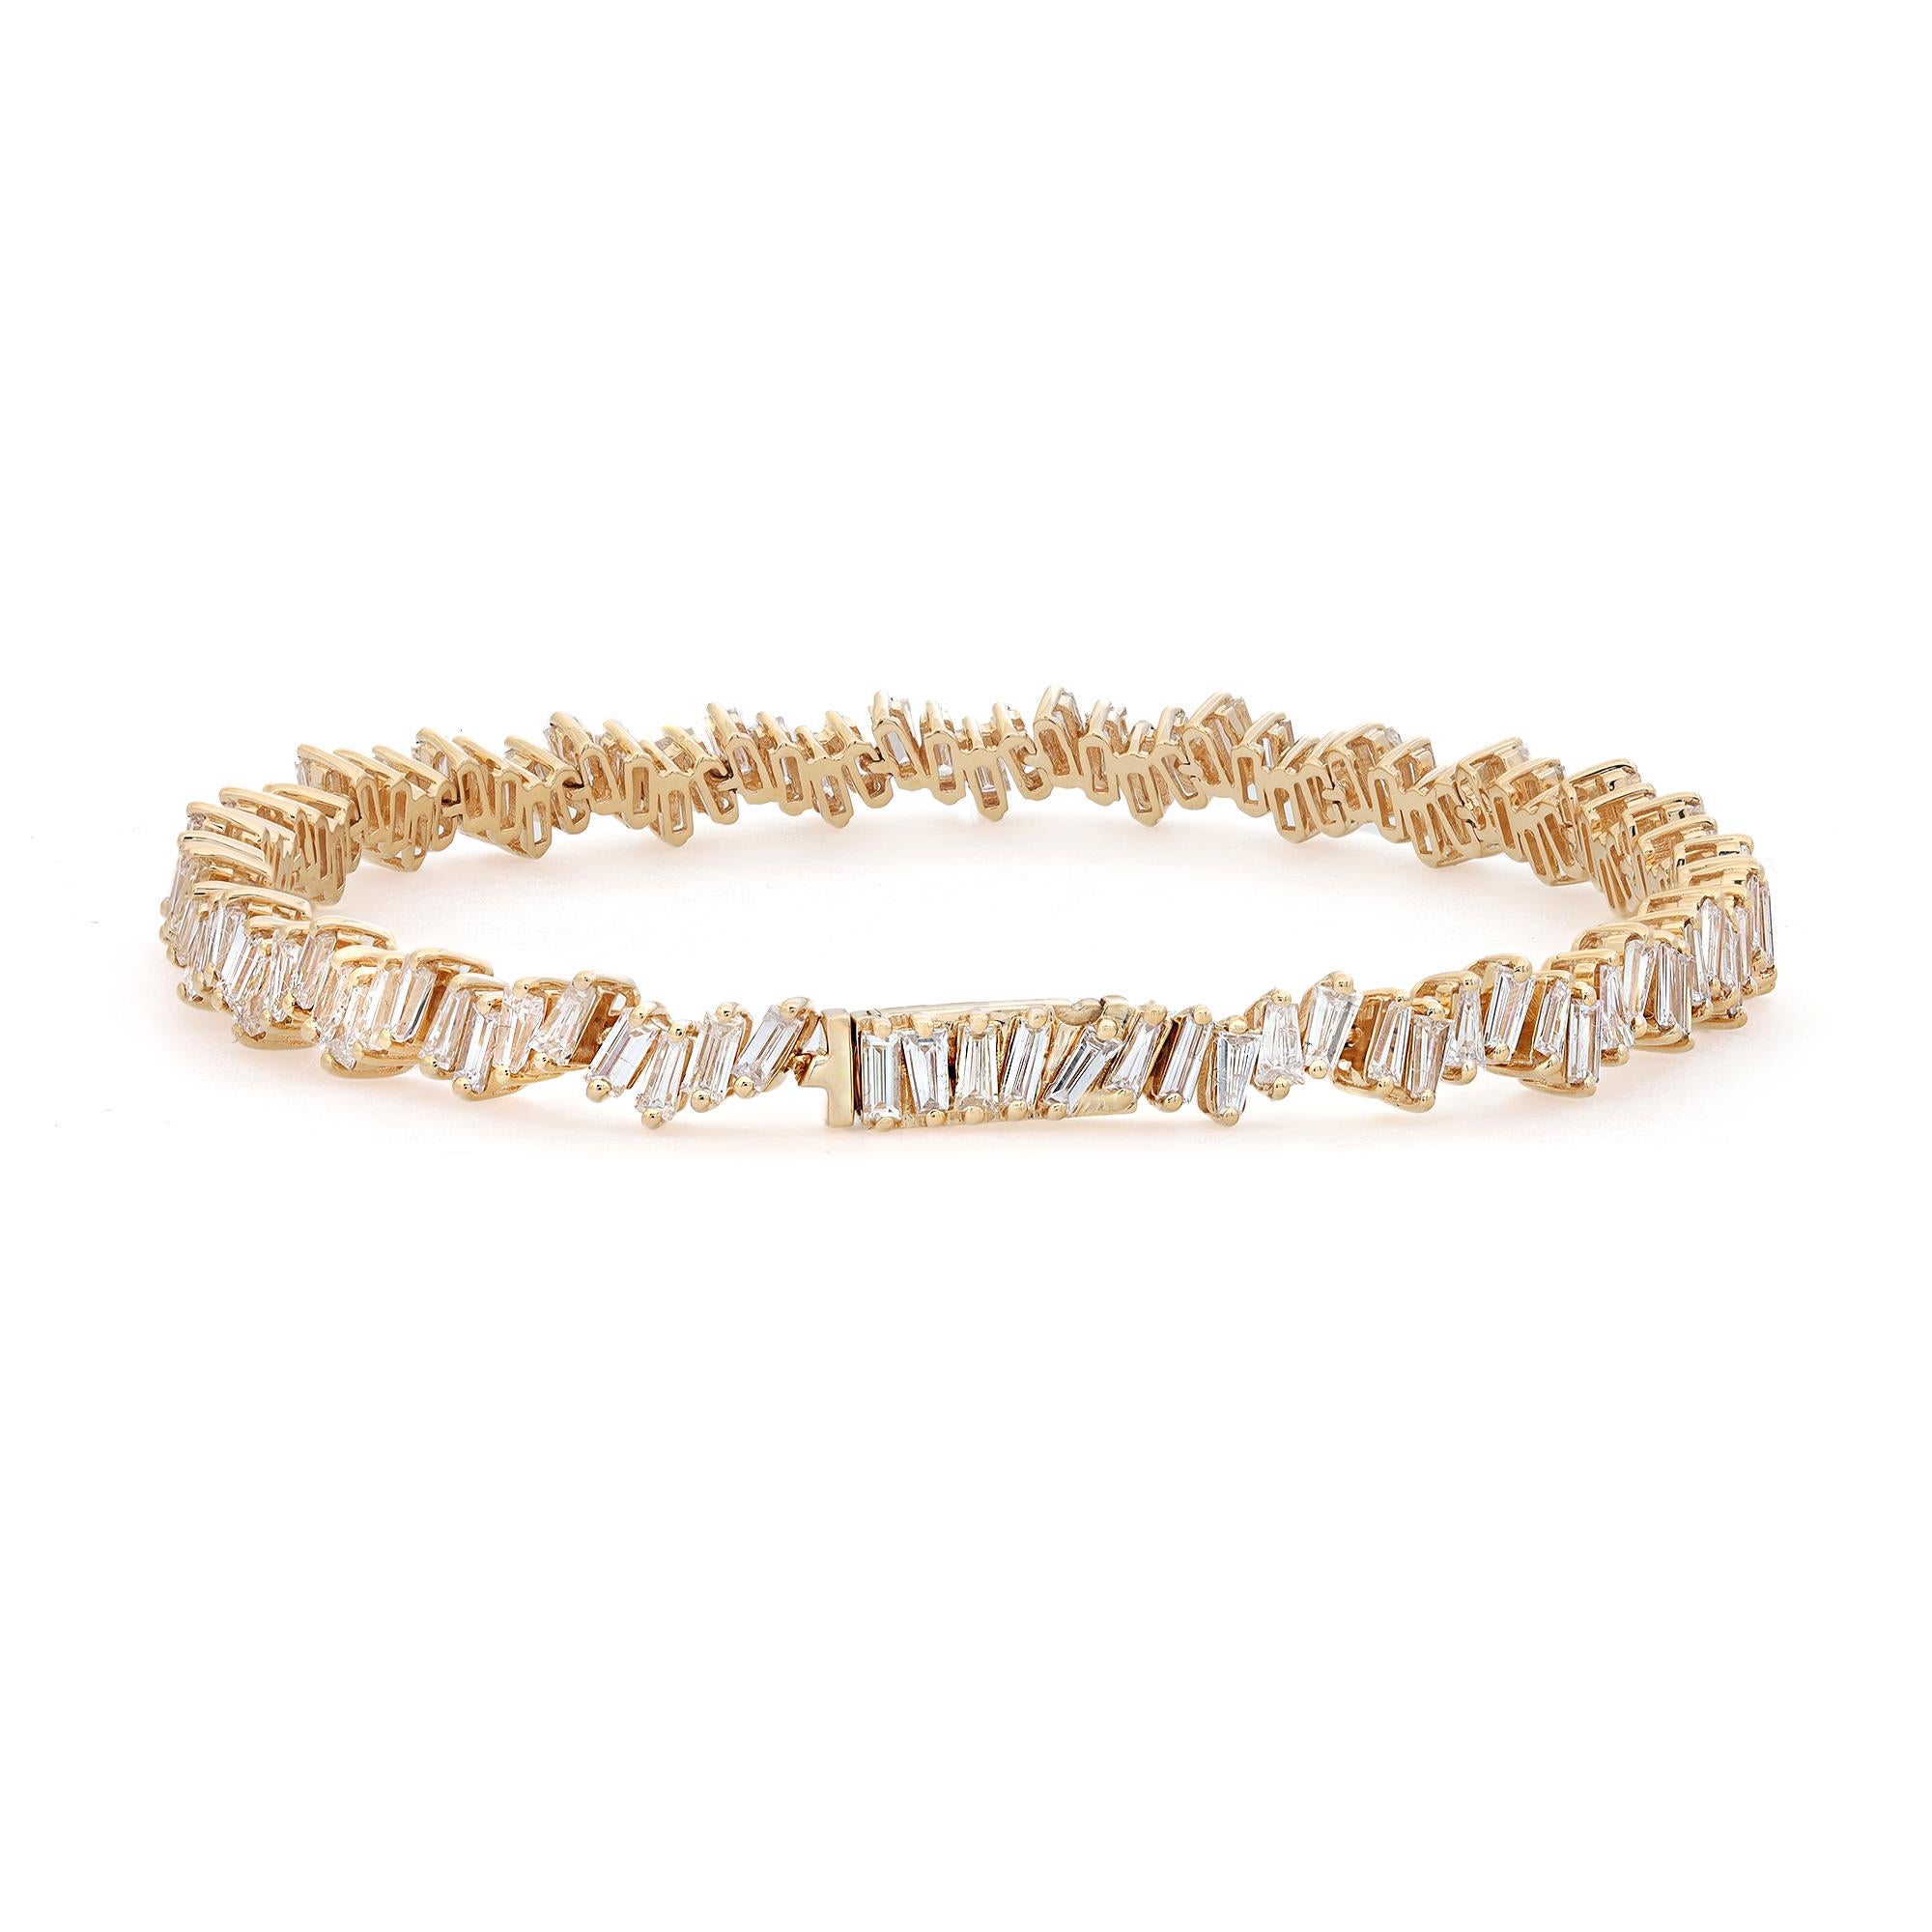 A classic look with easy elegance, this diamond bracelet exudes sophistication. Crafted in 18k yellow gold. This tennis bracelet features baguette cut diamonds encrusted in a zig-zag pattern in prong setting with a total diamond weight of 4.48